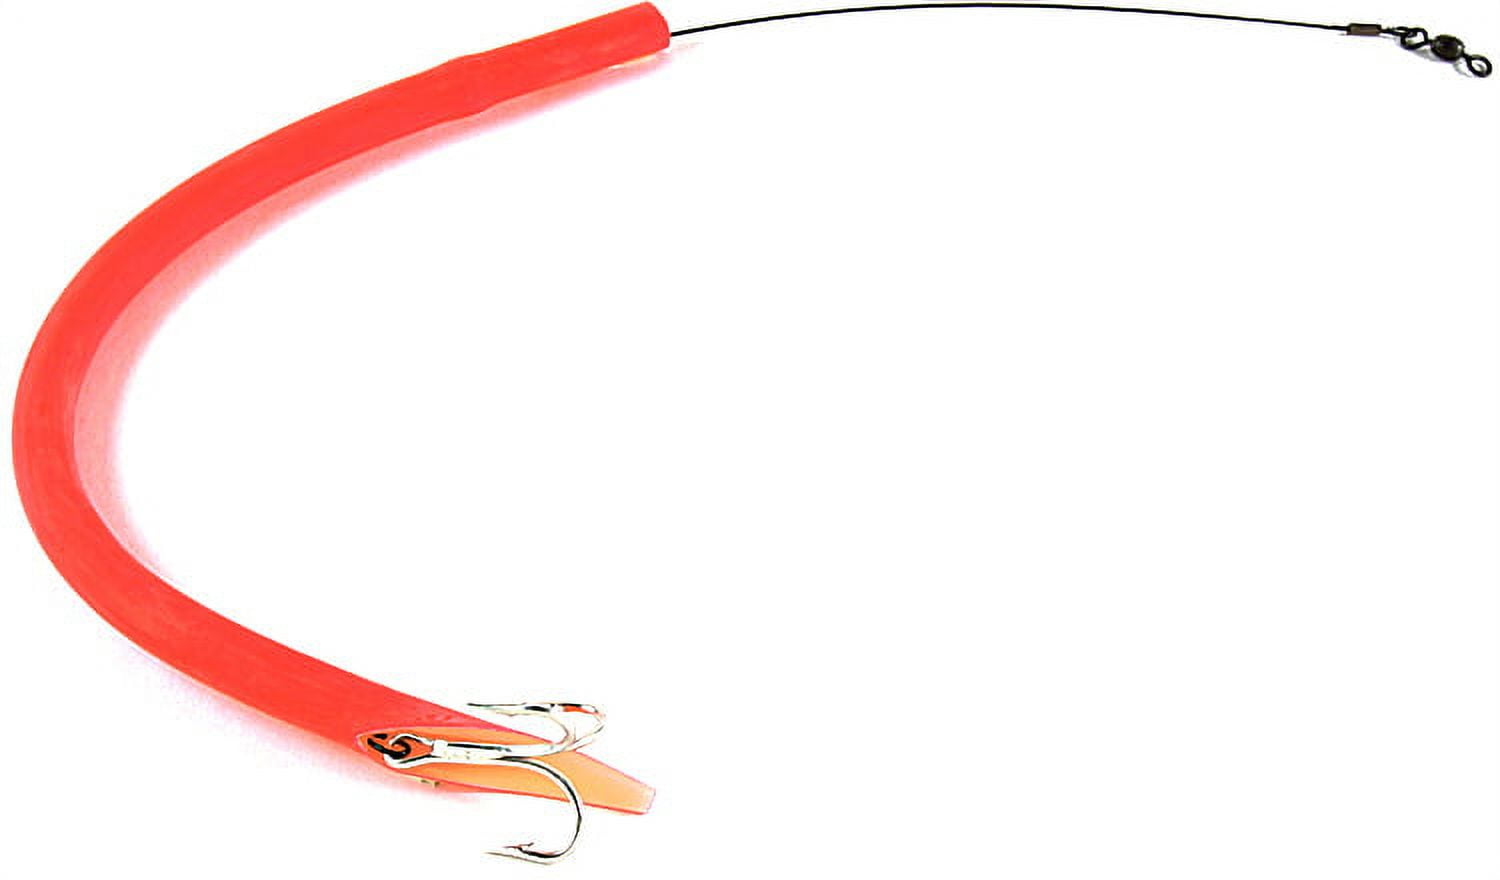 Sea Striker Cuda Tube 12 Surgical Tube with Treble Hook, Red